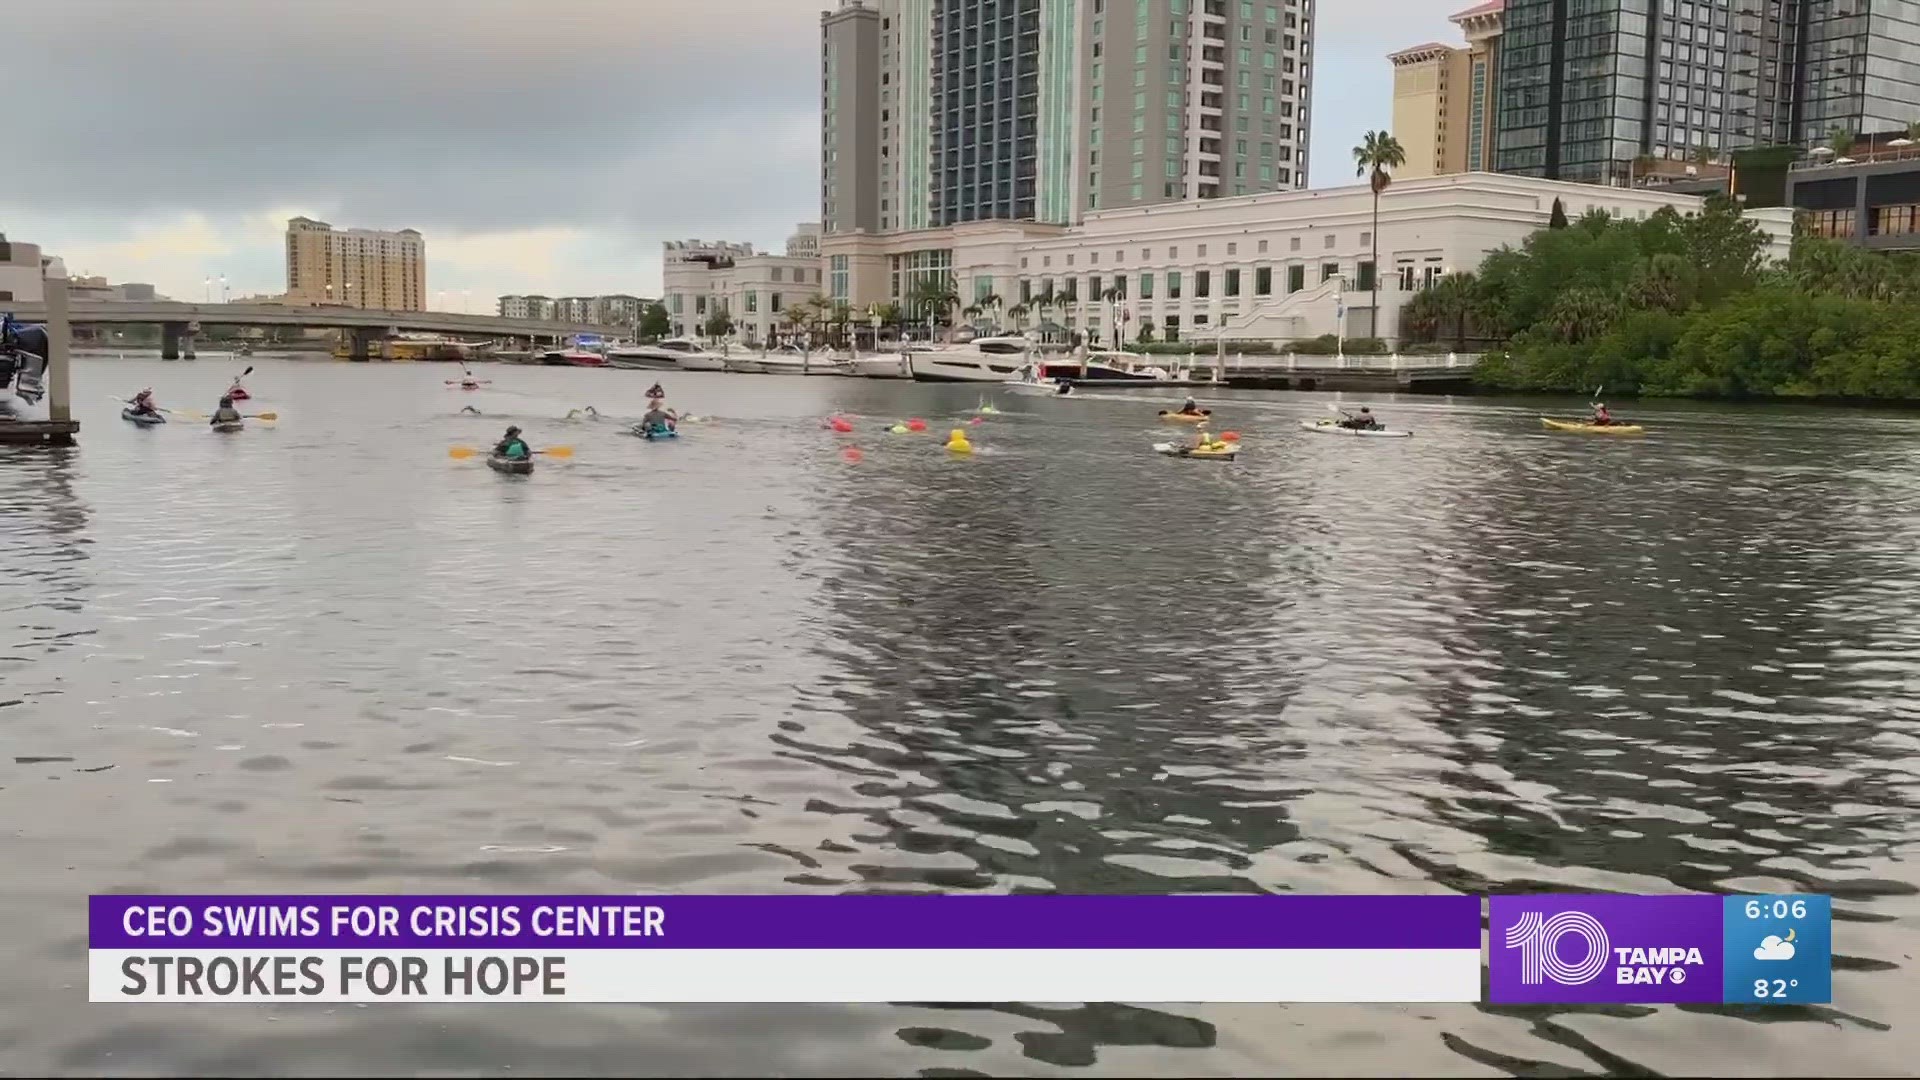 Strokes for Hope raises awareness and money for programs including suicide prevention, trauma counseling and sexual assault services.